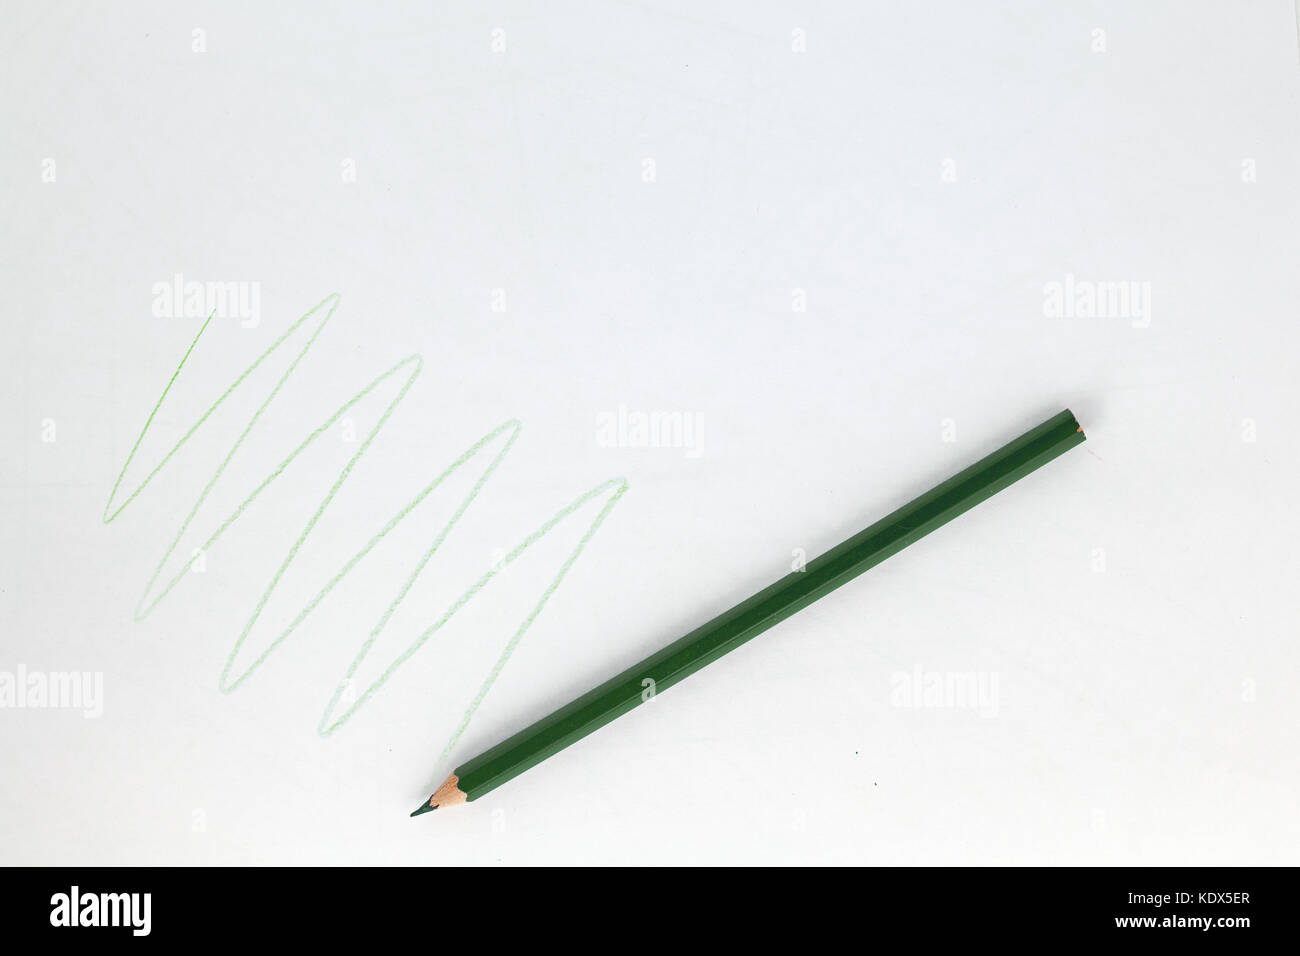 Pencil drawing green zigzag on white paper Stock Photo